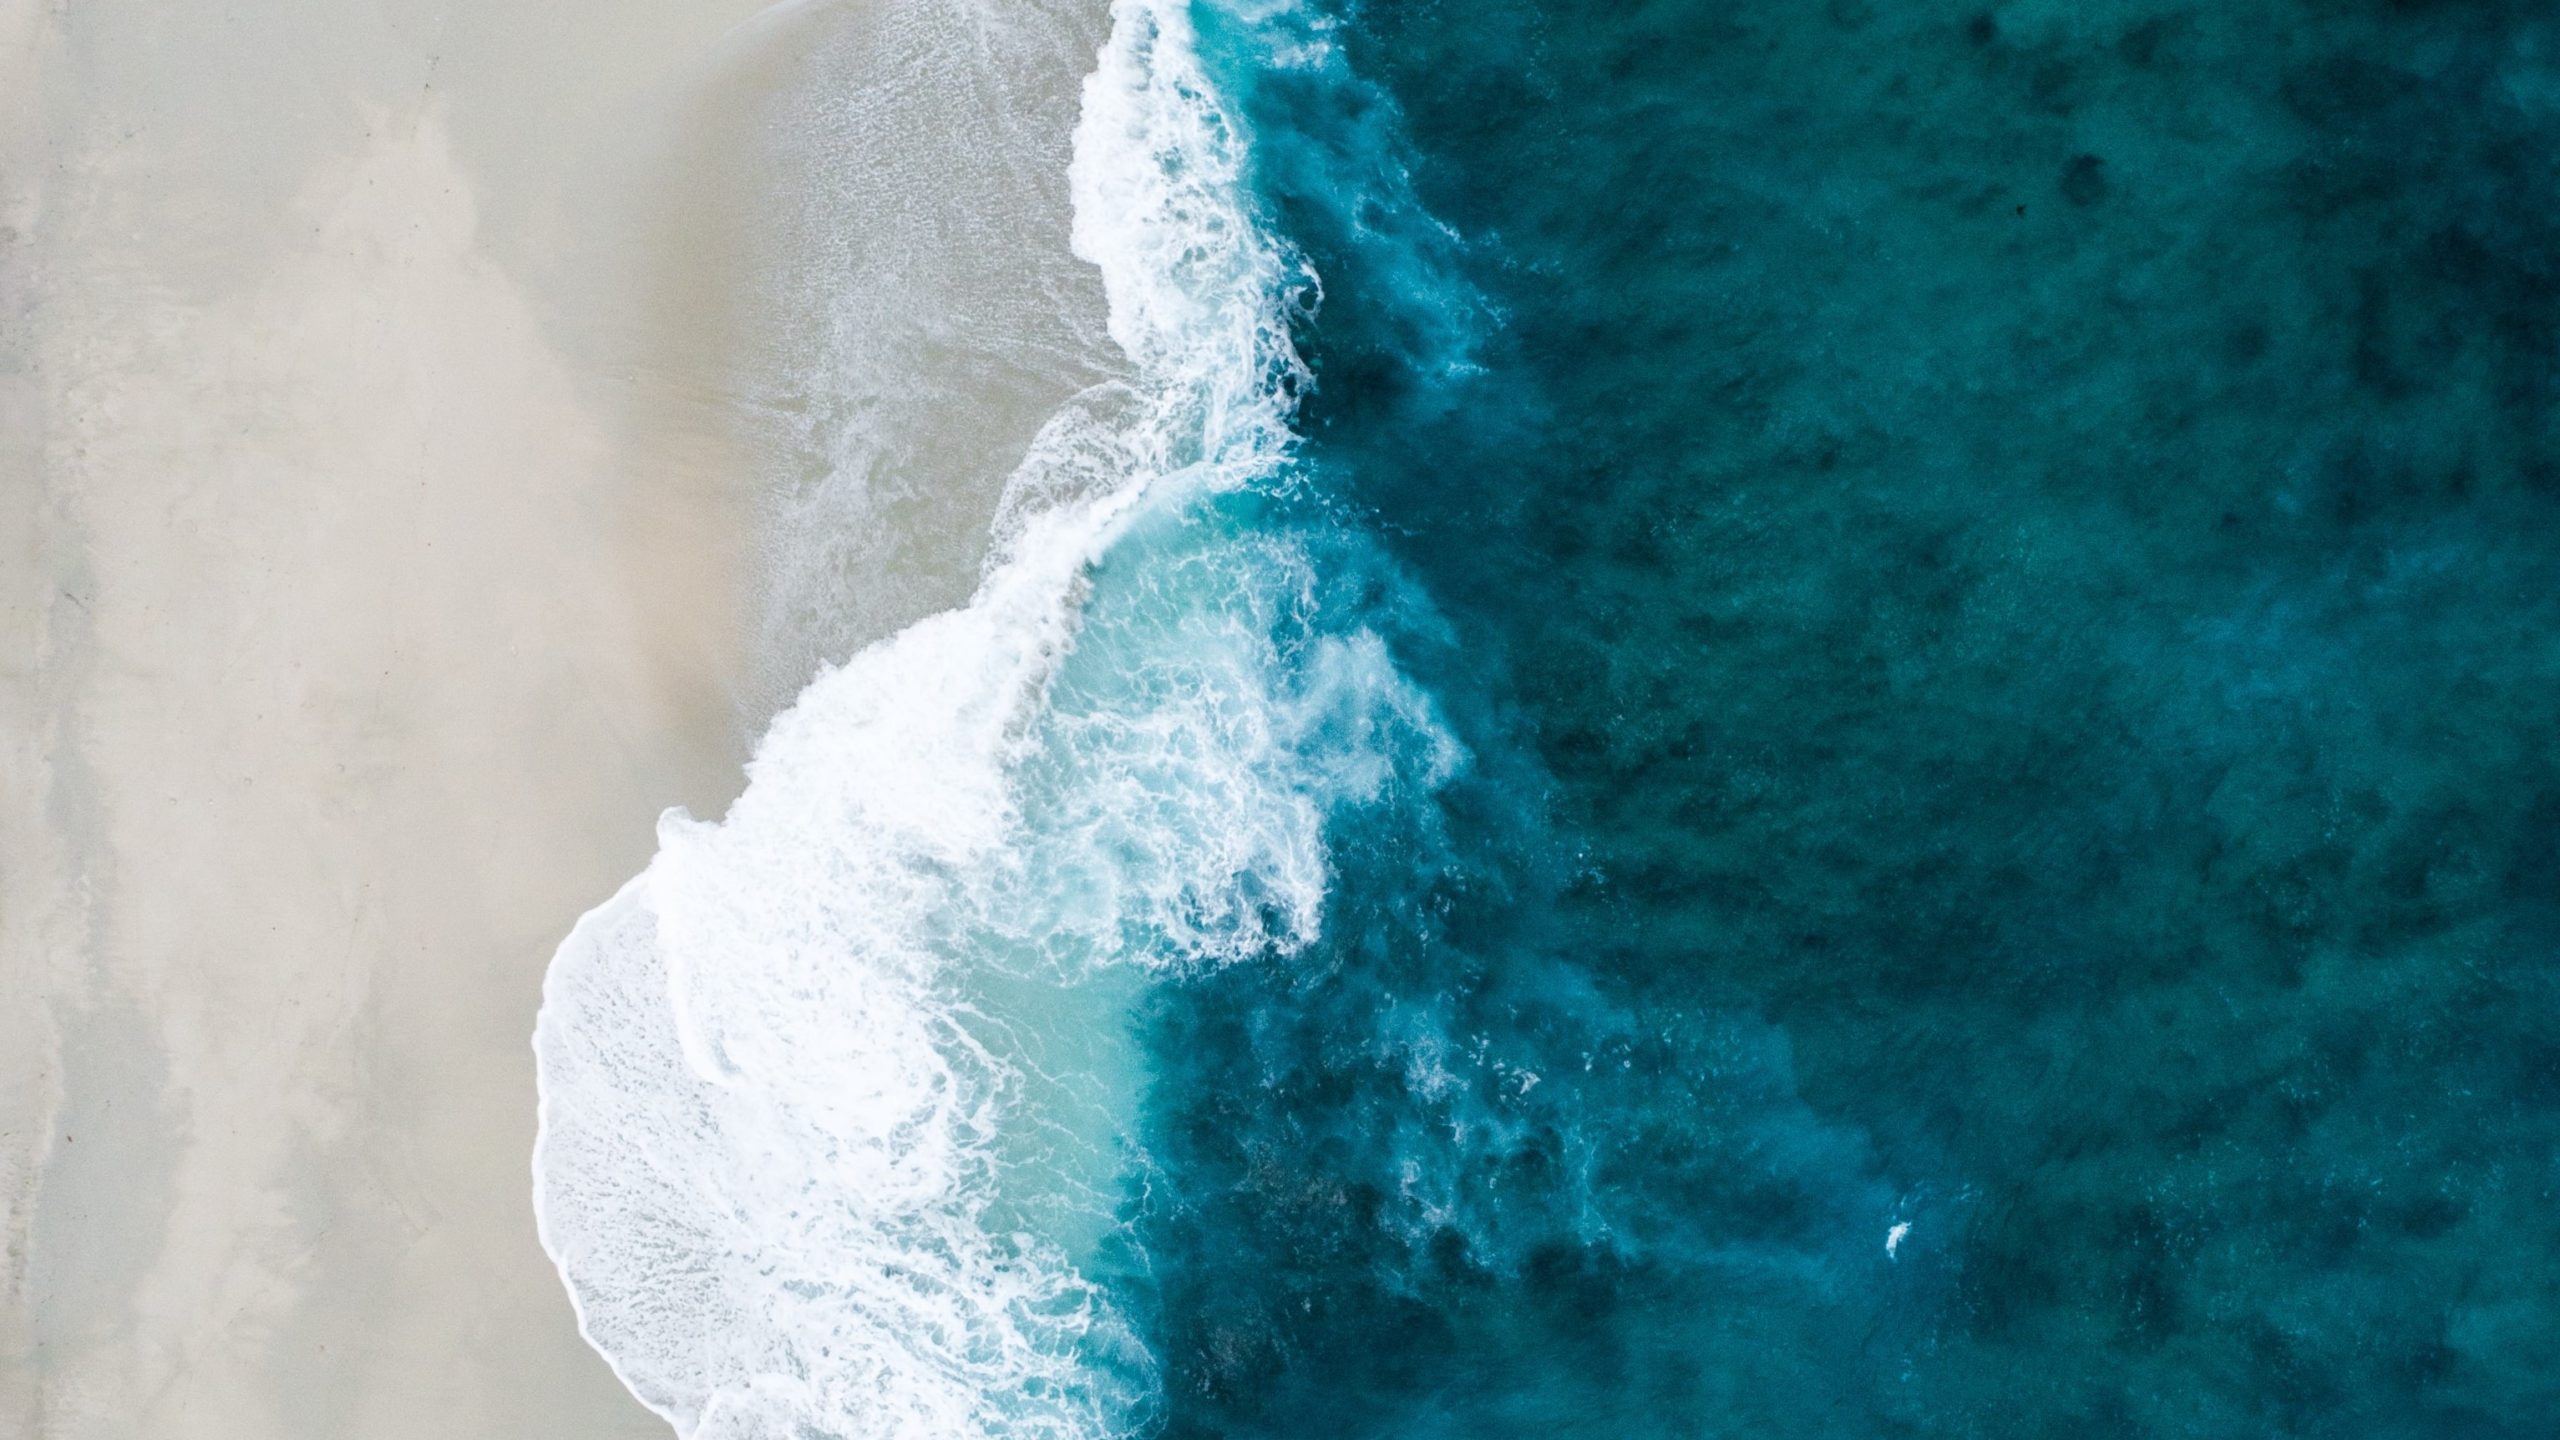 Arial View Of The Ocean Showing The Waves Hitting The - It's Just One Straw Said 8 Billion People - HD Wallpaper 